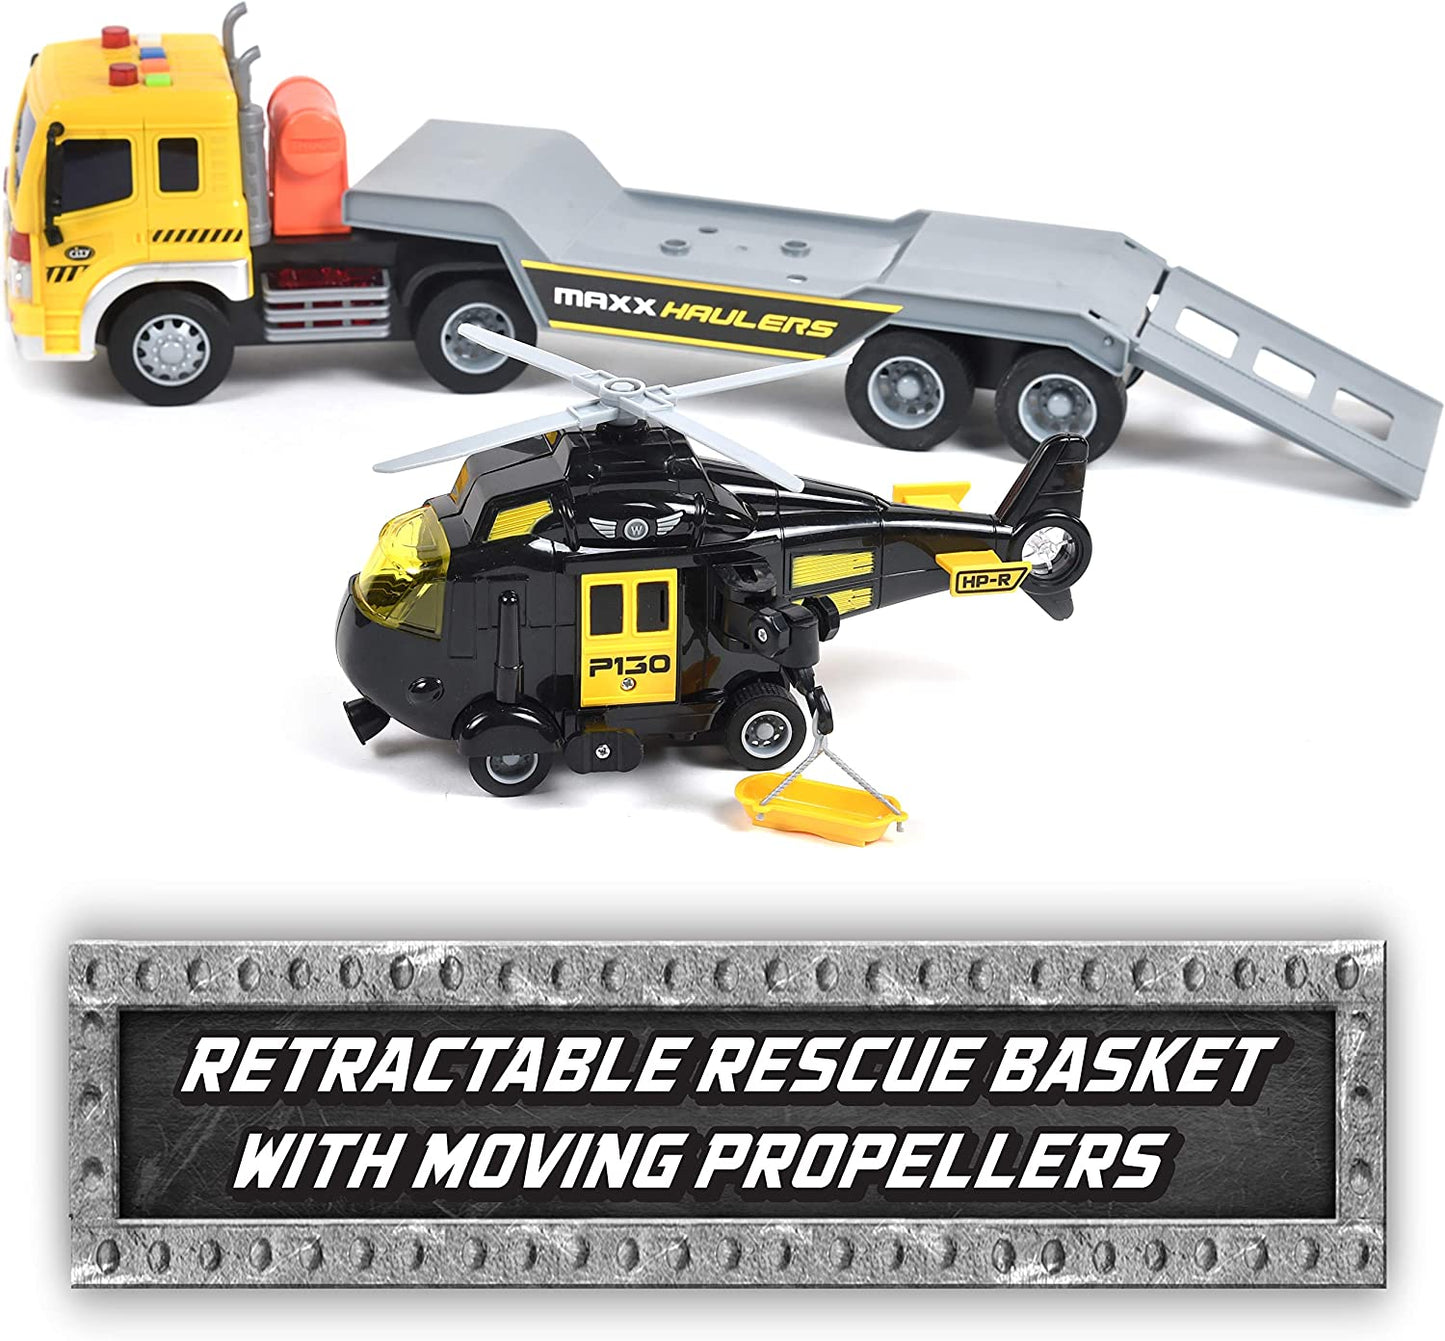 Sunny Days Maxx Action Long Hauler with Helicopter Playset Vehicles